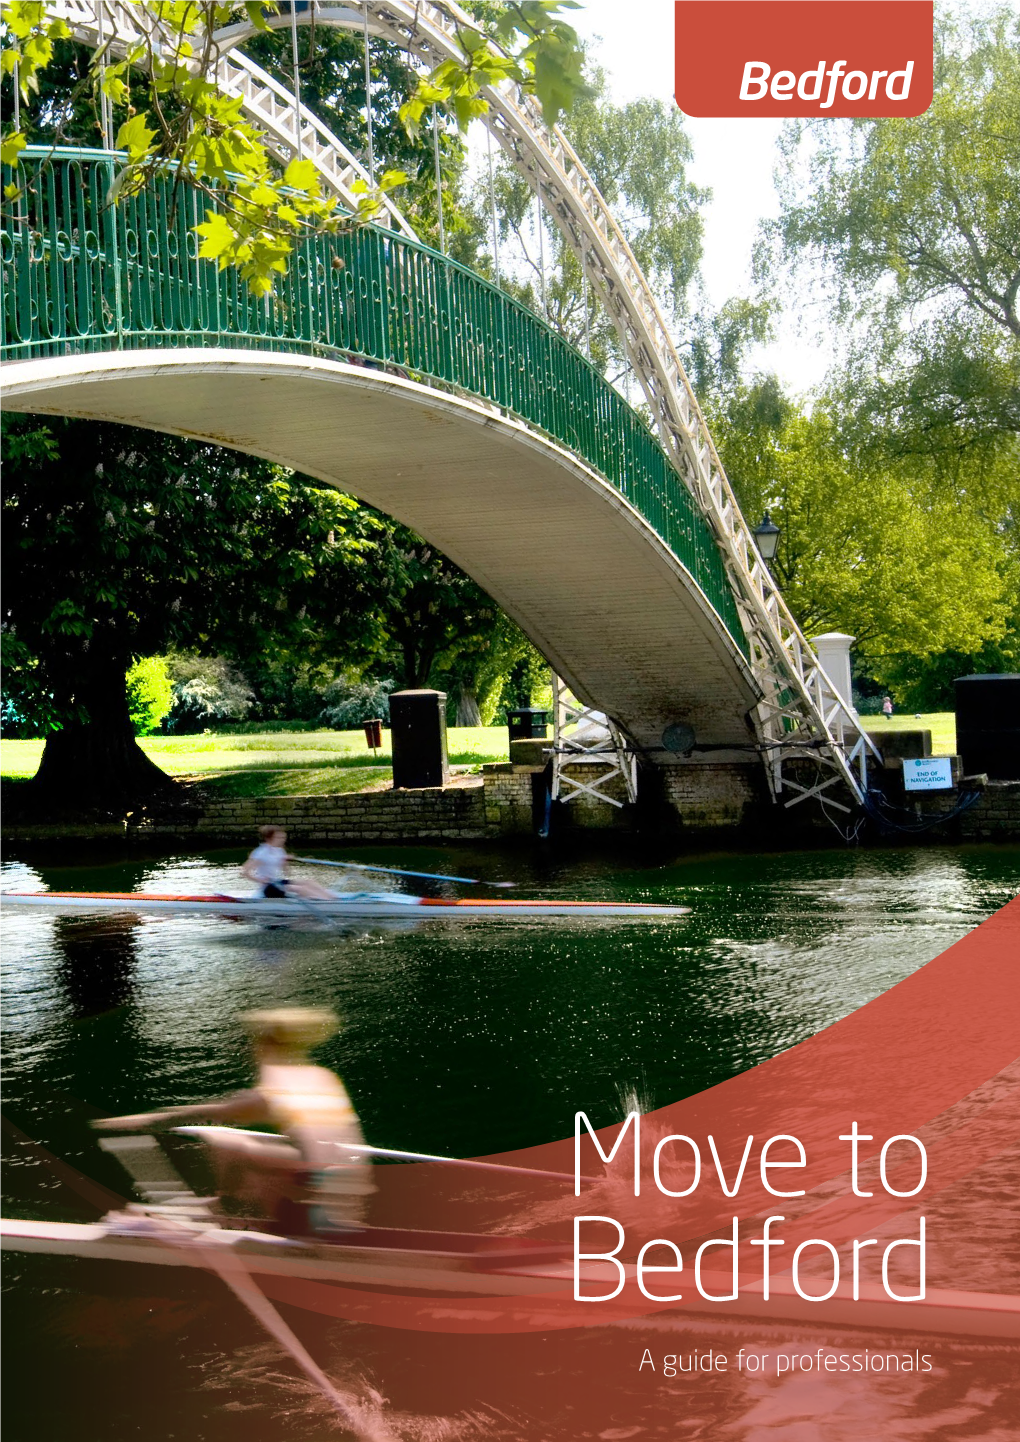 Move to Bedford a Guide for Professionals